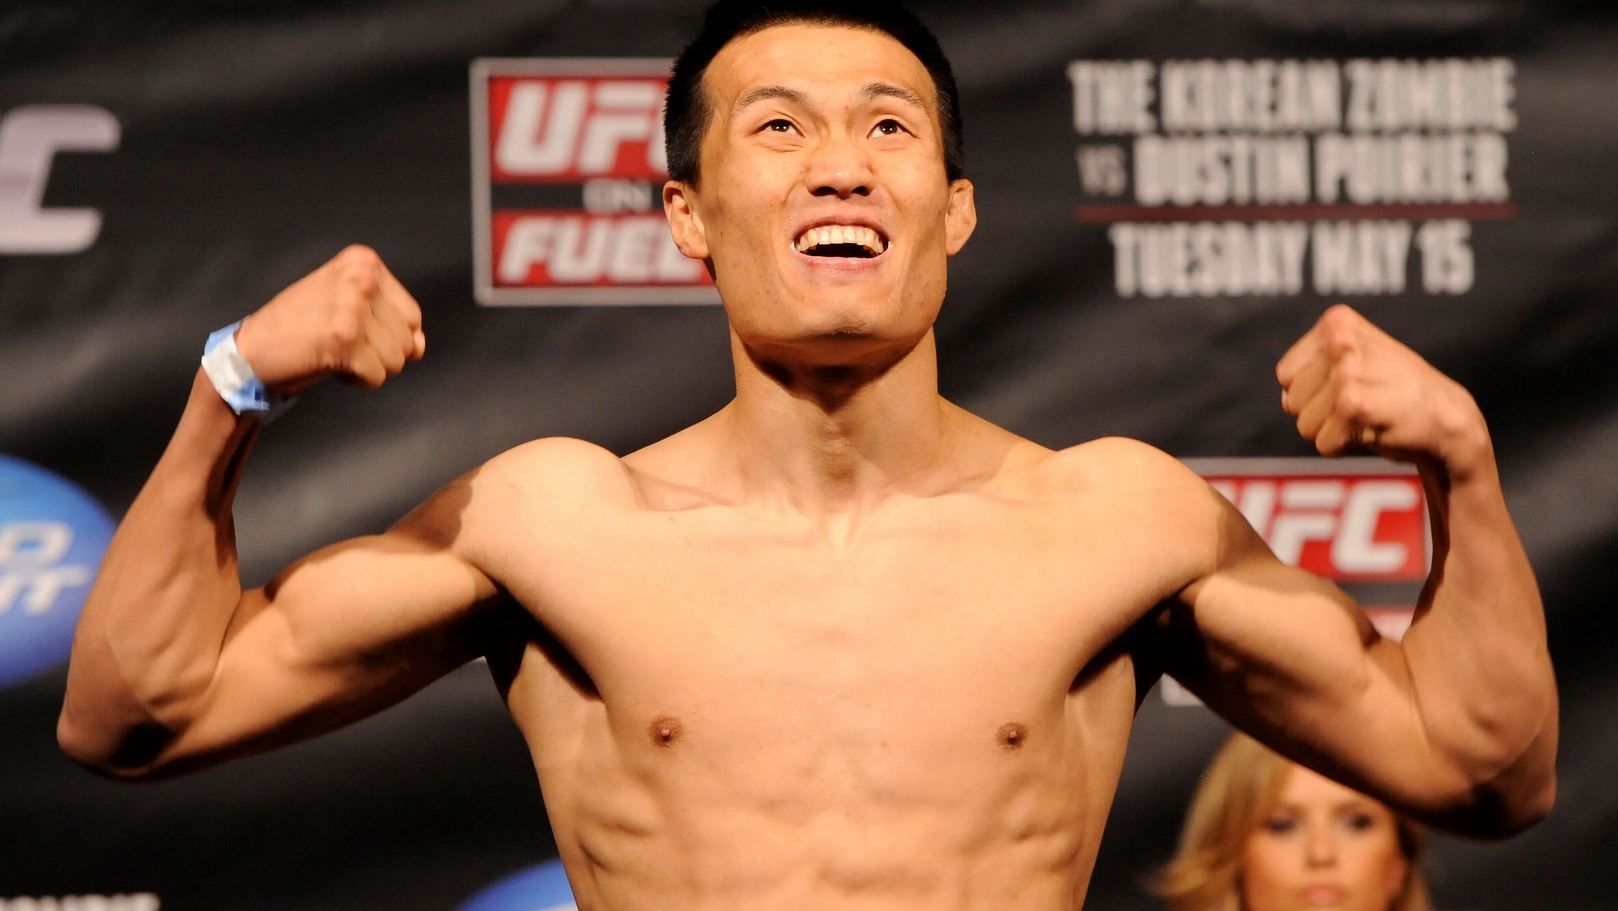 UFC tournament in Seoul may be canceled due to Korean Zombie's injury